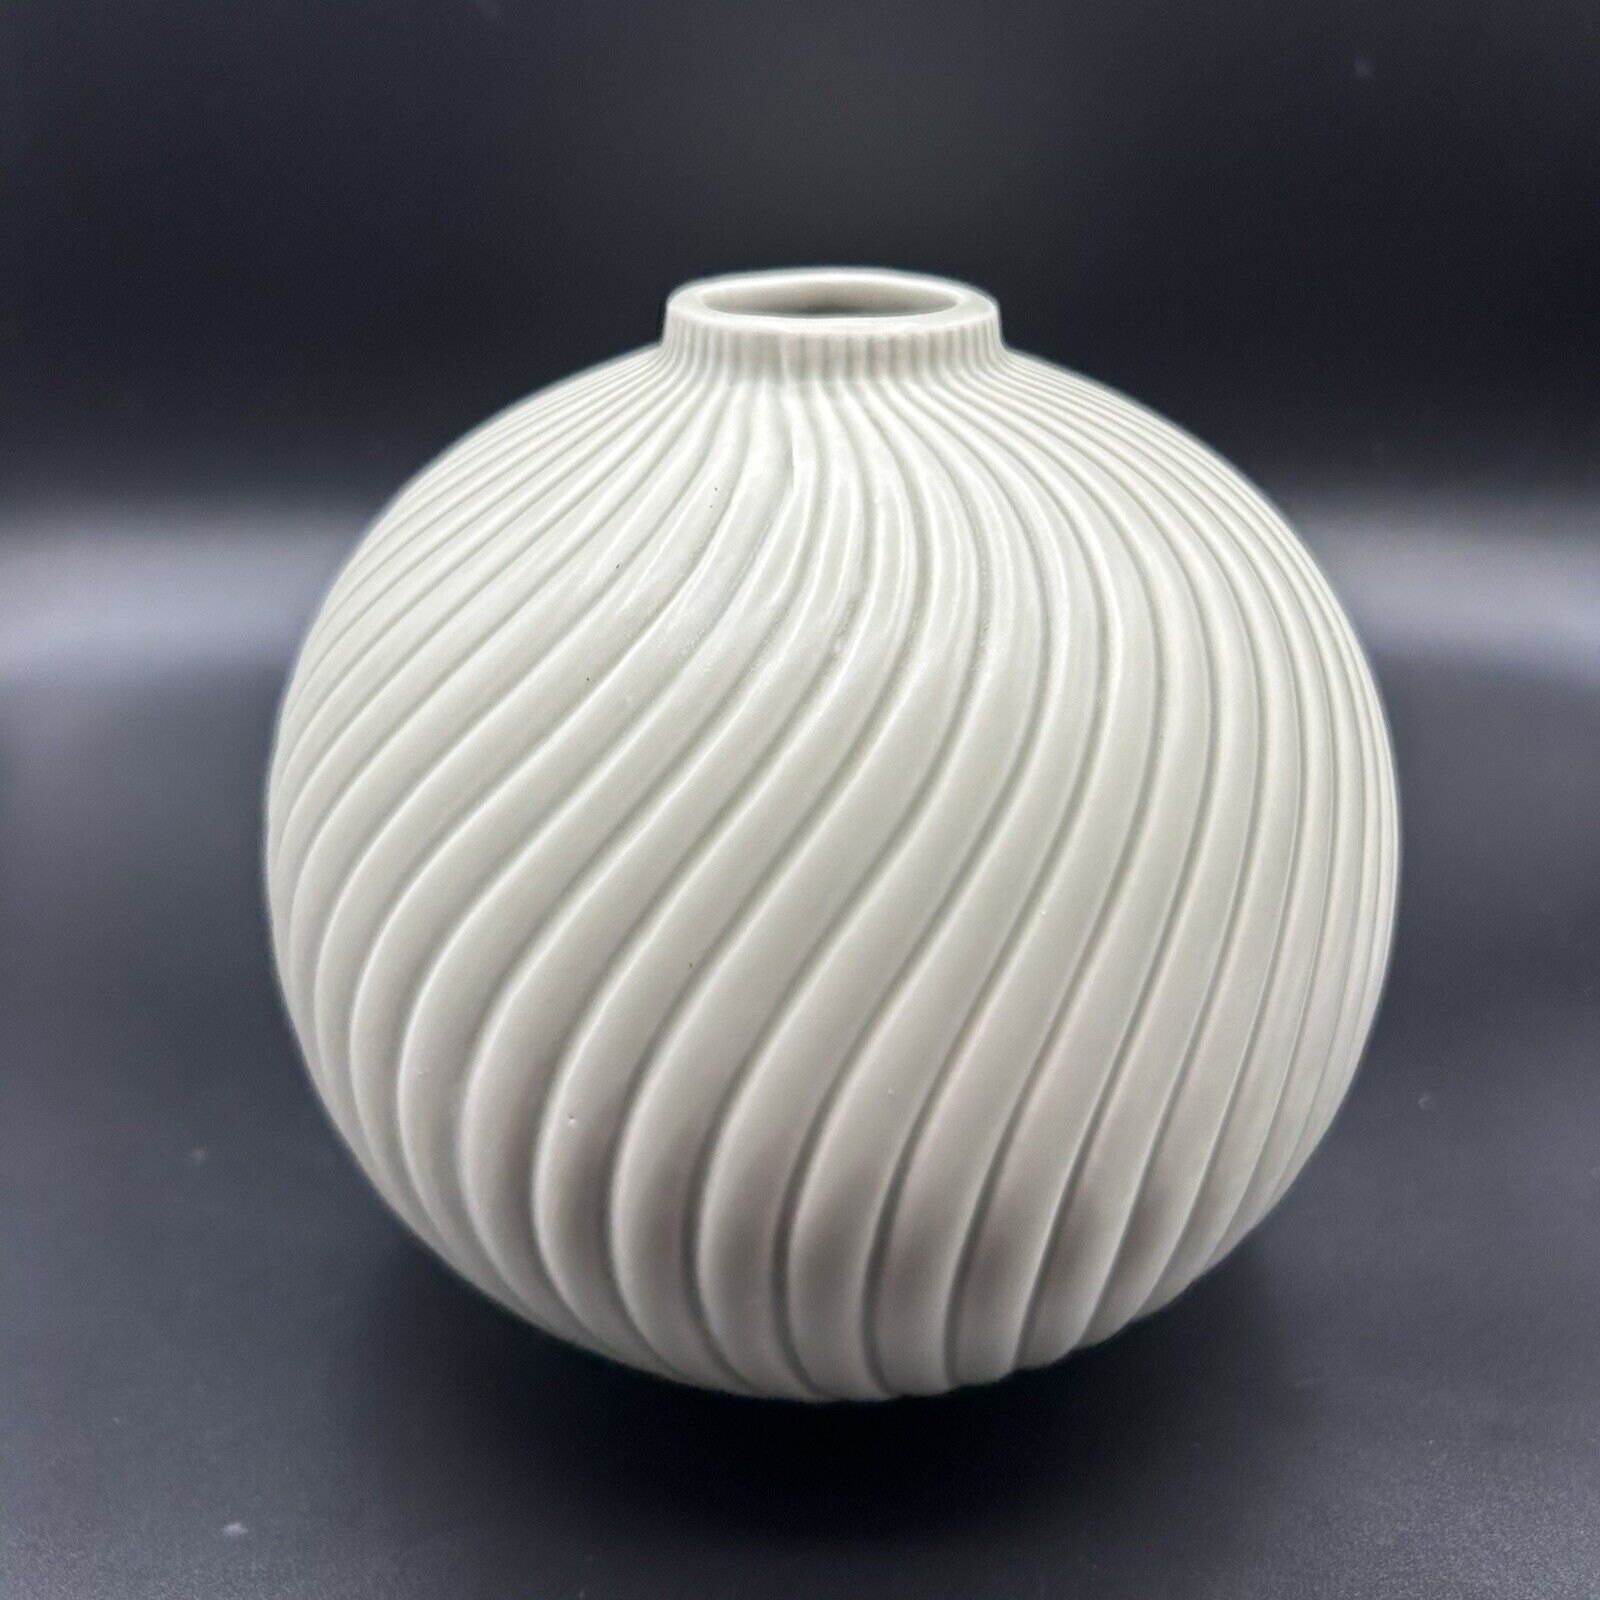 Vintage 1980s Fitz and Floyd Round Vase With Spiral Design Made in Japan